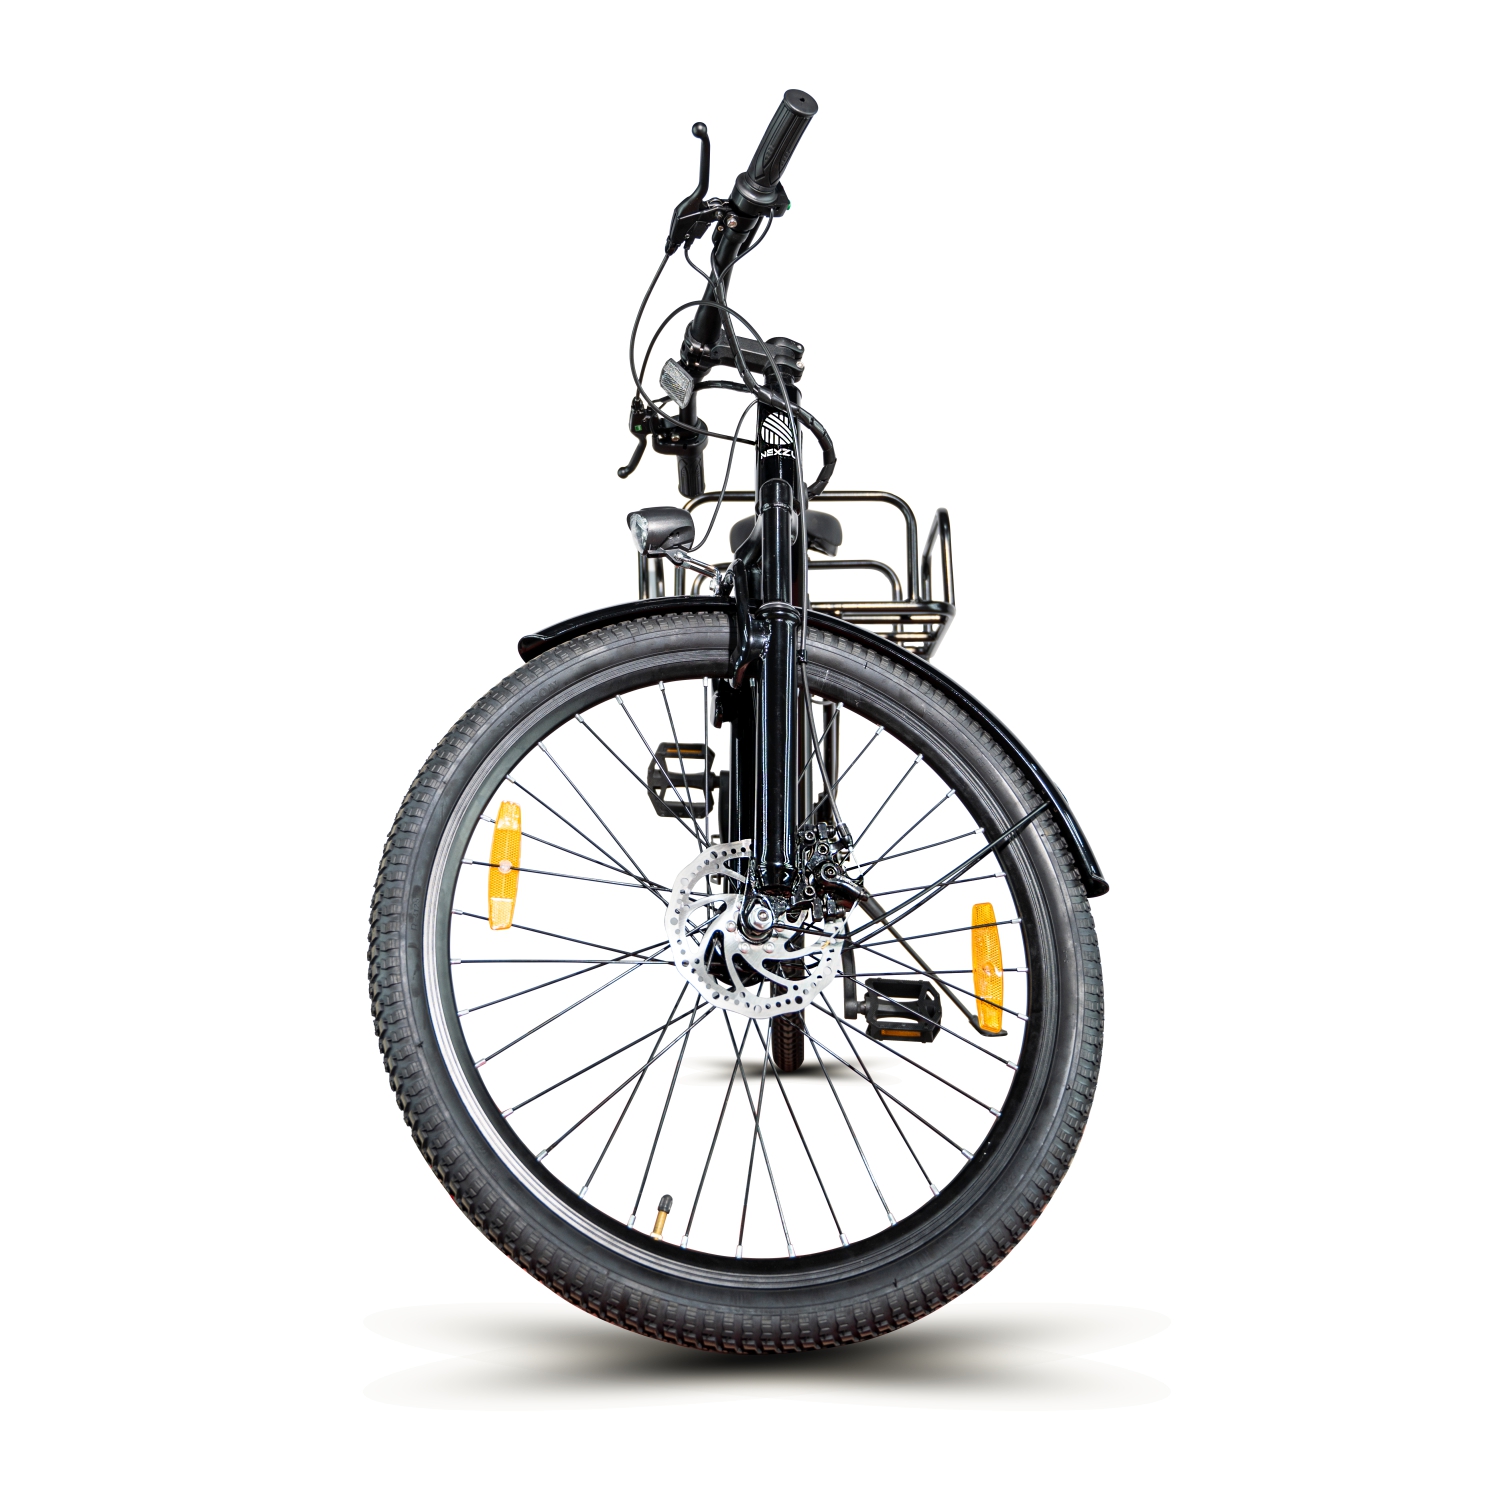 electric bicycle Roadlark model with cargo carrier